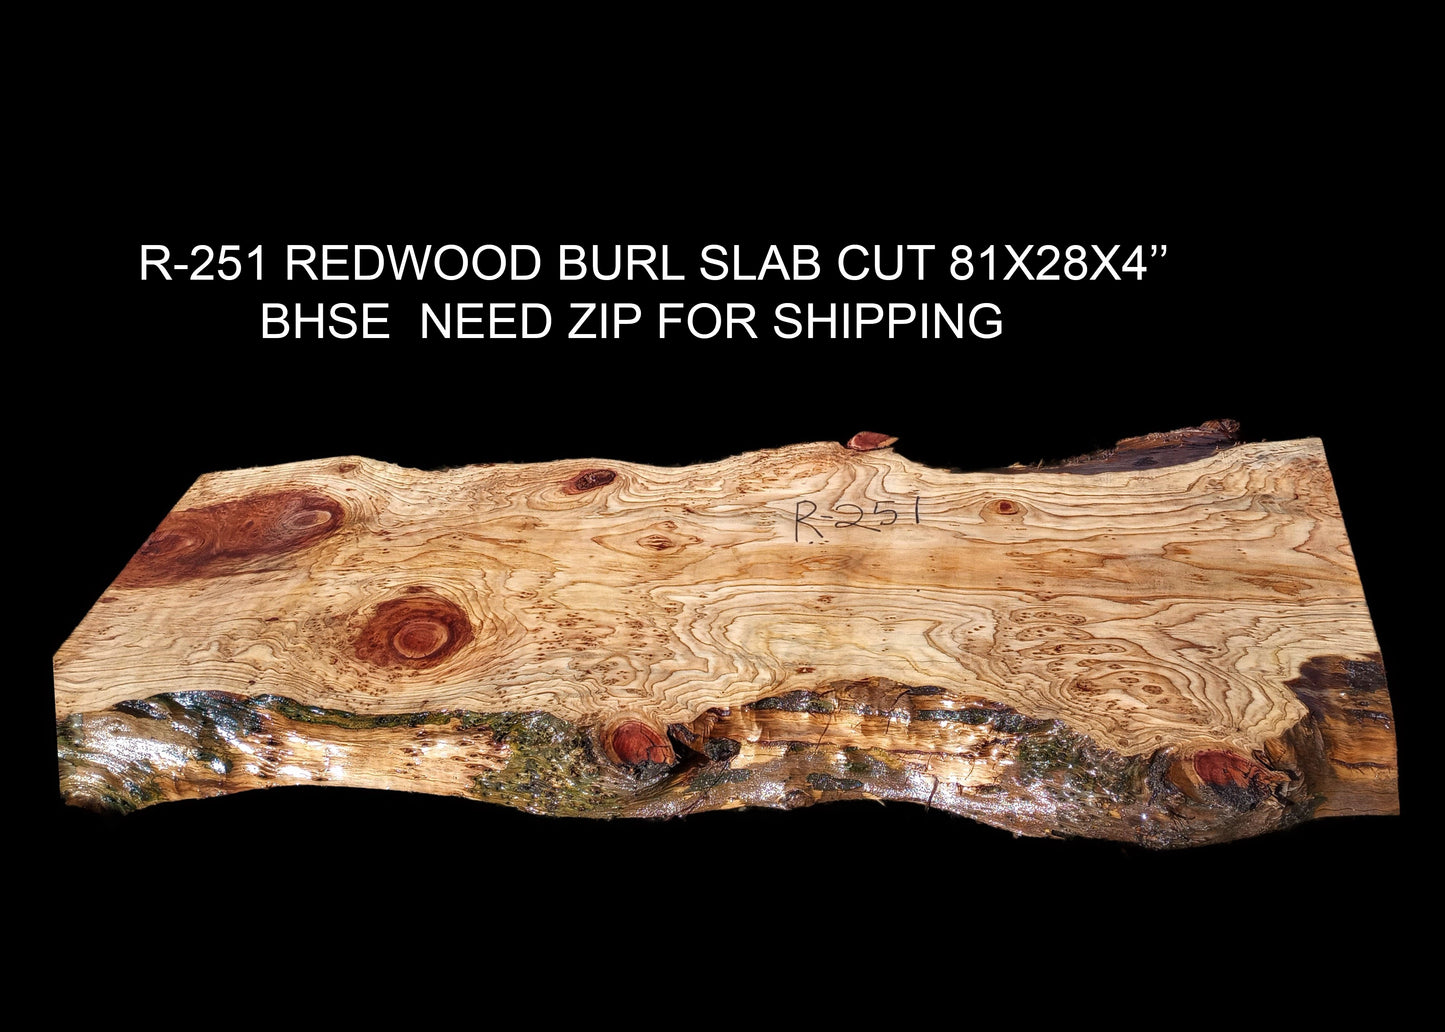 Burl table | redwood burl and curly | DIY wood crafts | r215